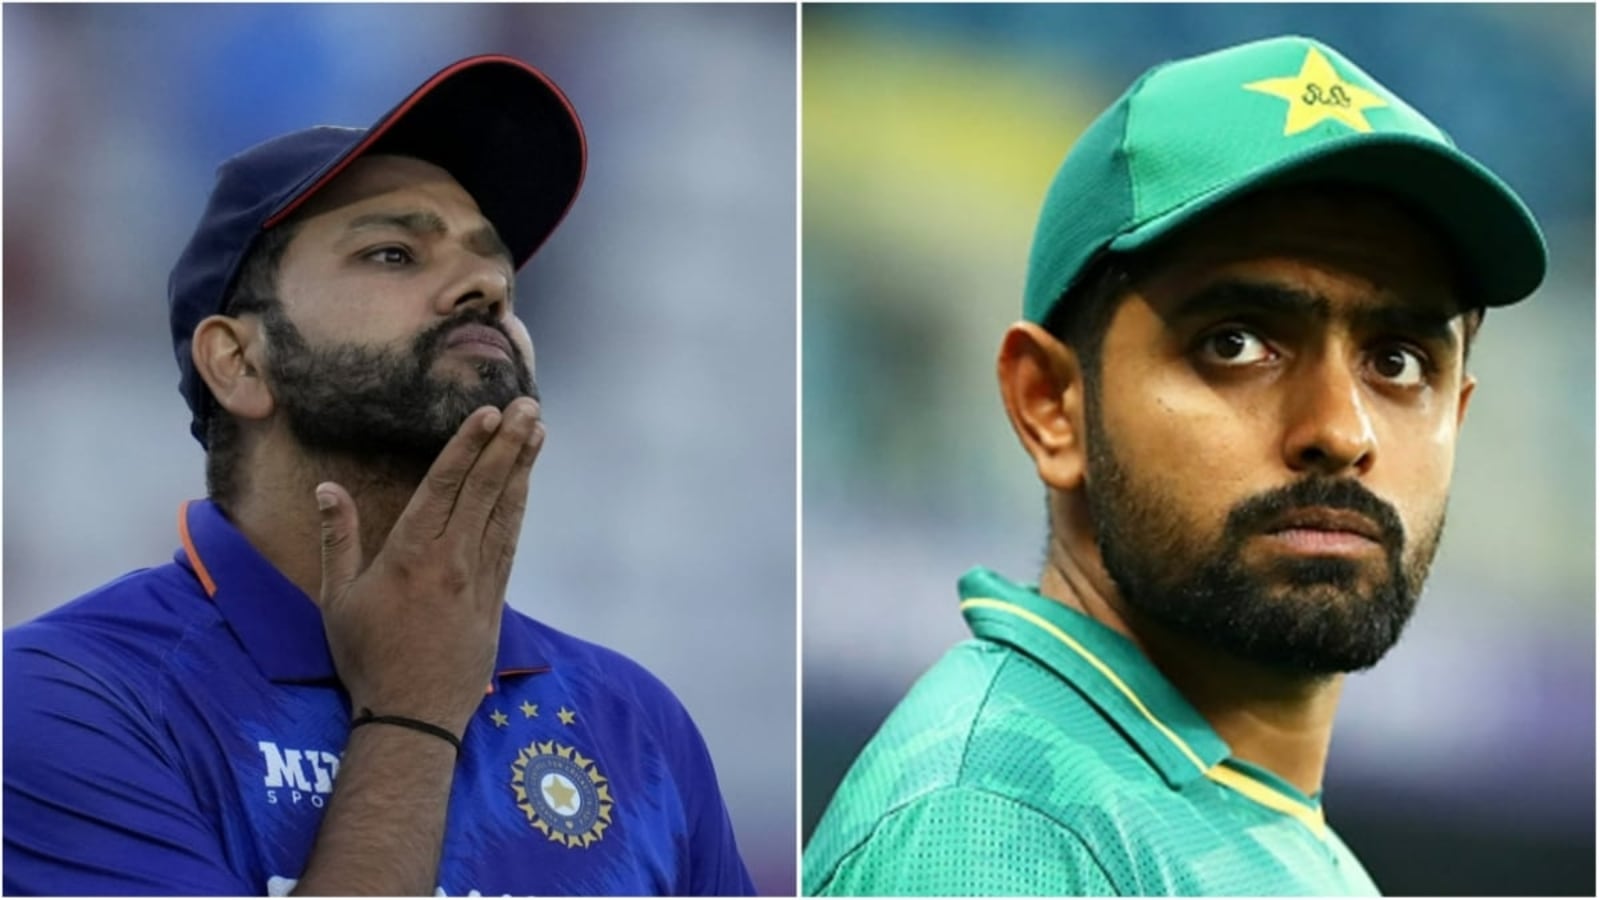 india-vs-pakistan-head-to-head-key-stats-and-records-as-arch-rivals-meet-again-in-asia-cup